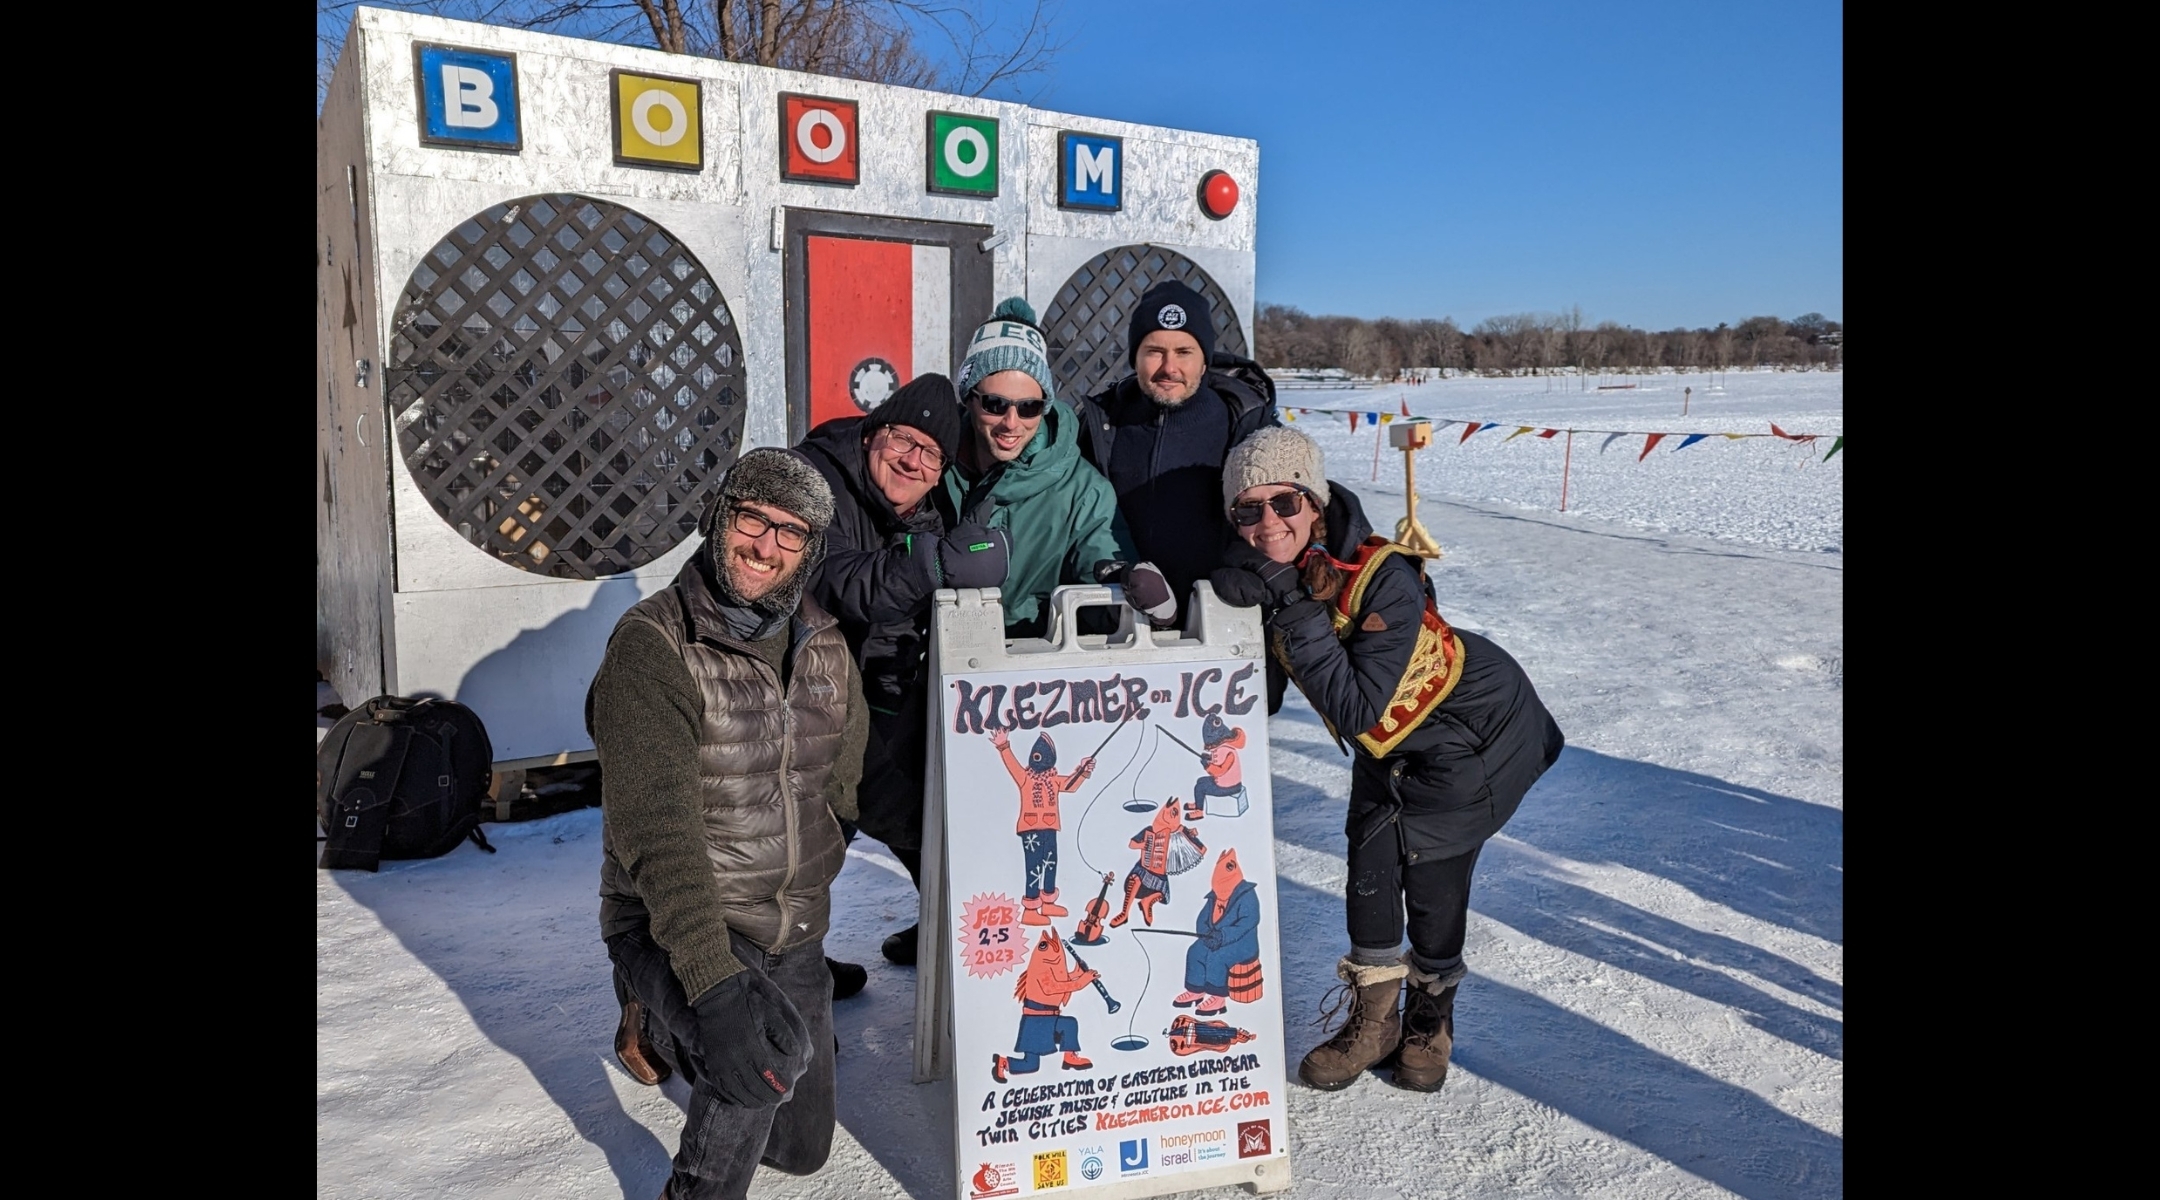 From left to right: klezmer musicians Greg Schweser, Pat O’Keefe, Josh Rosard, Michael Leville, and Sarah Larsson pose for a picture in front of the Art Shanty popup in Minneapolis. (Courtesy of Josh Rosard)